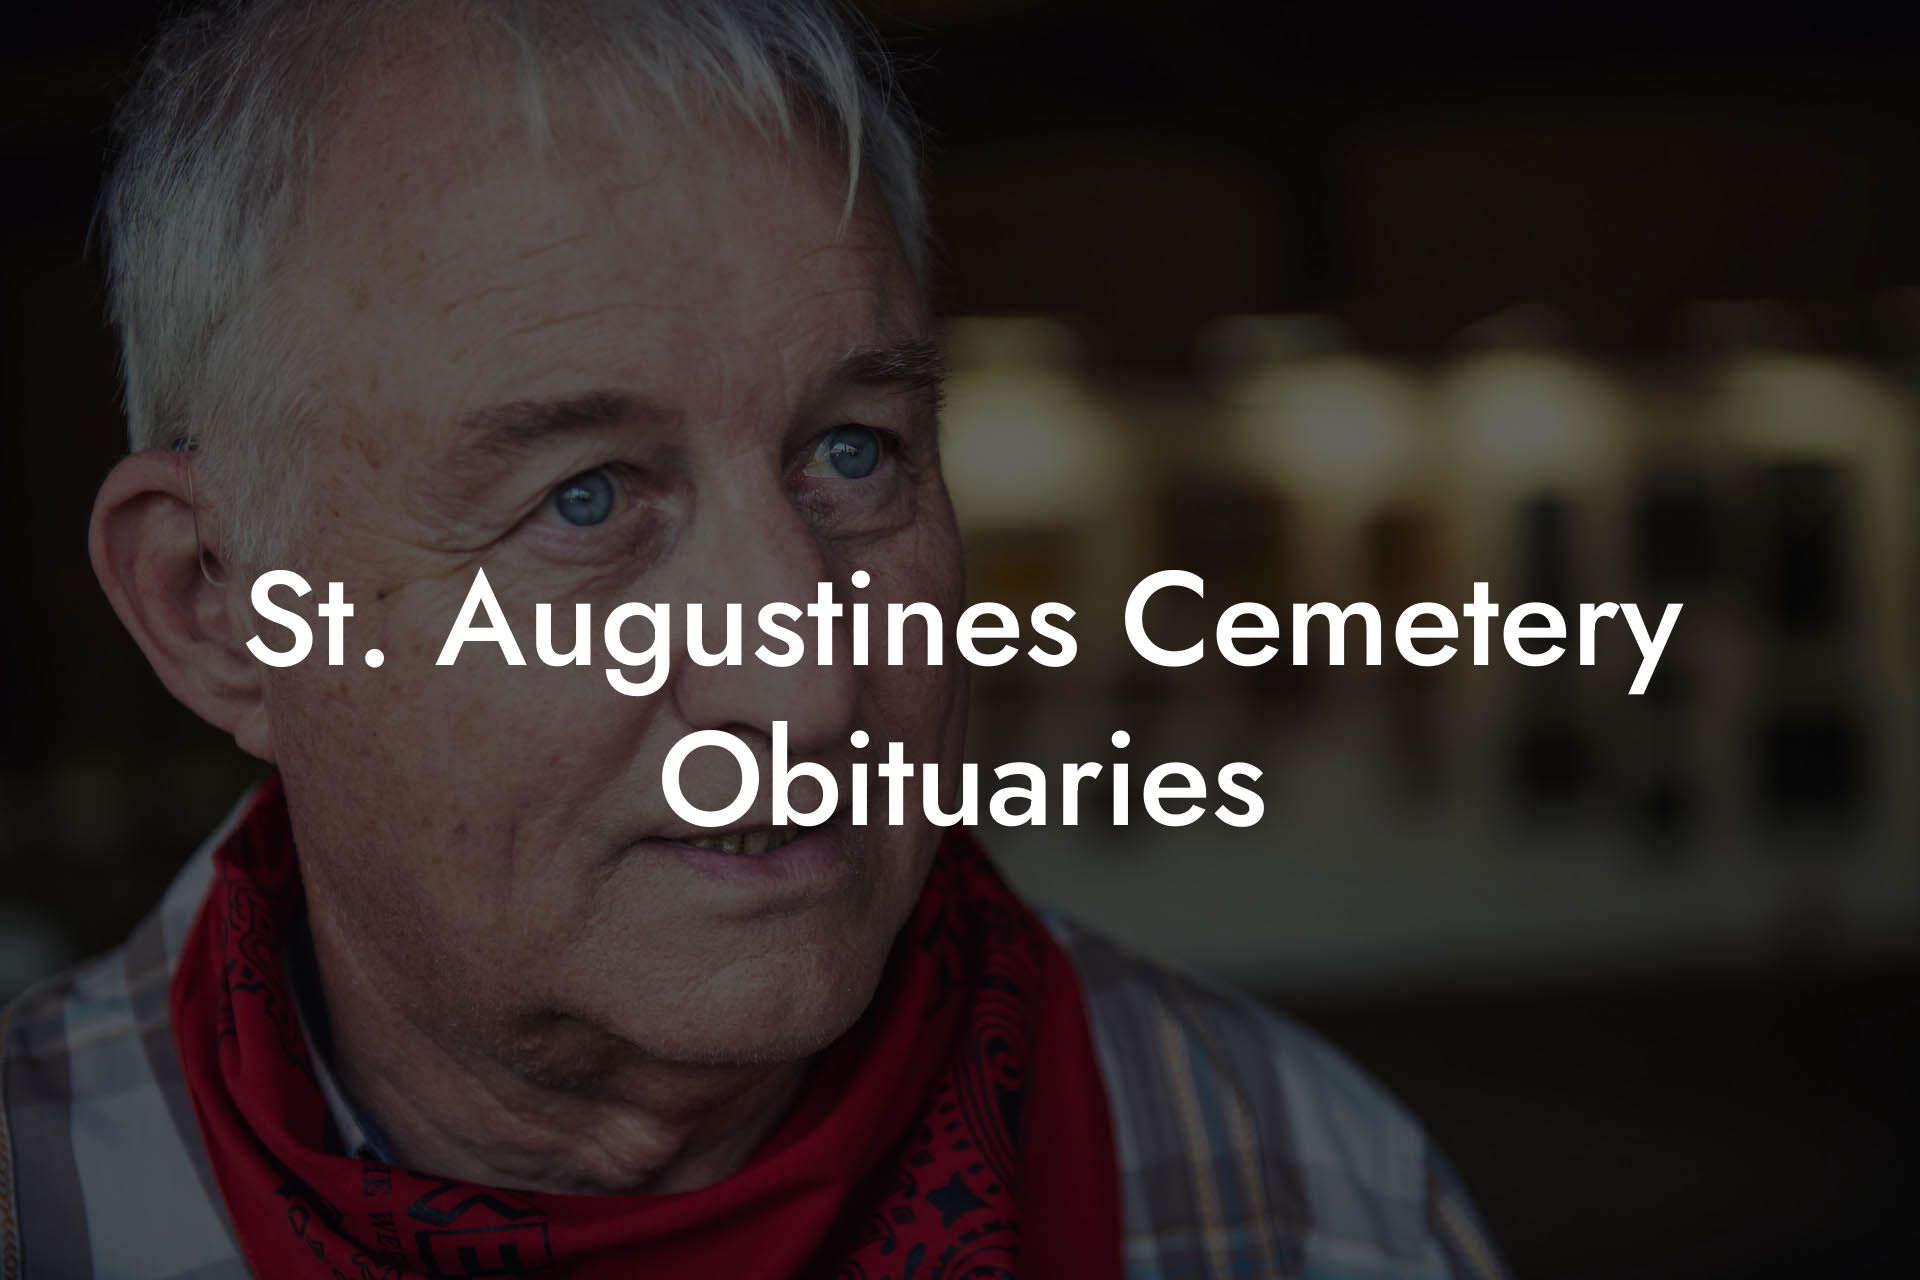 St. Augustines Cemetery Obituaries